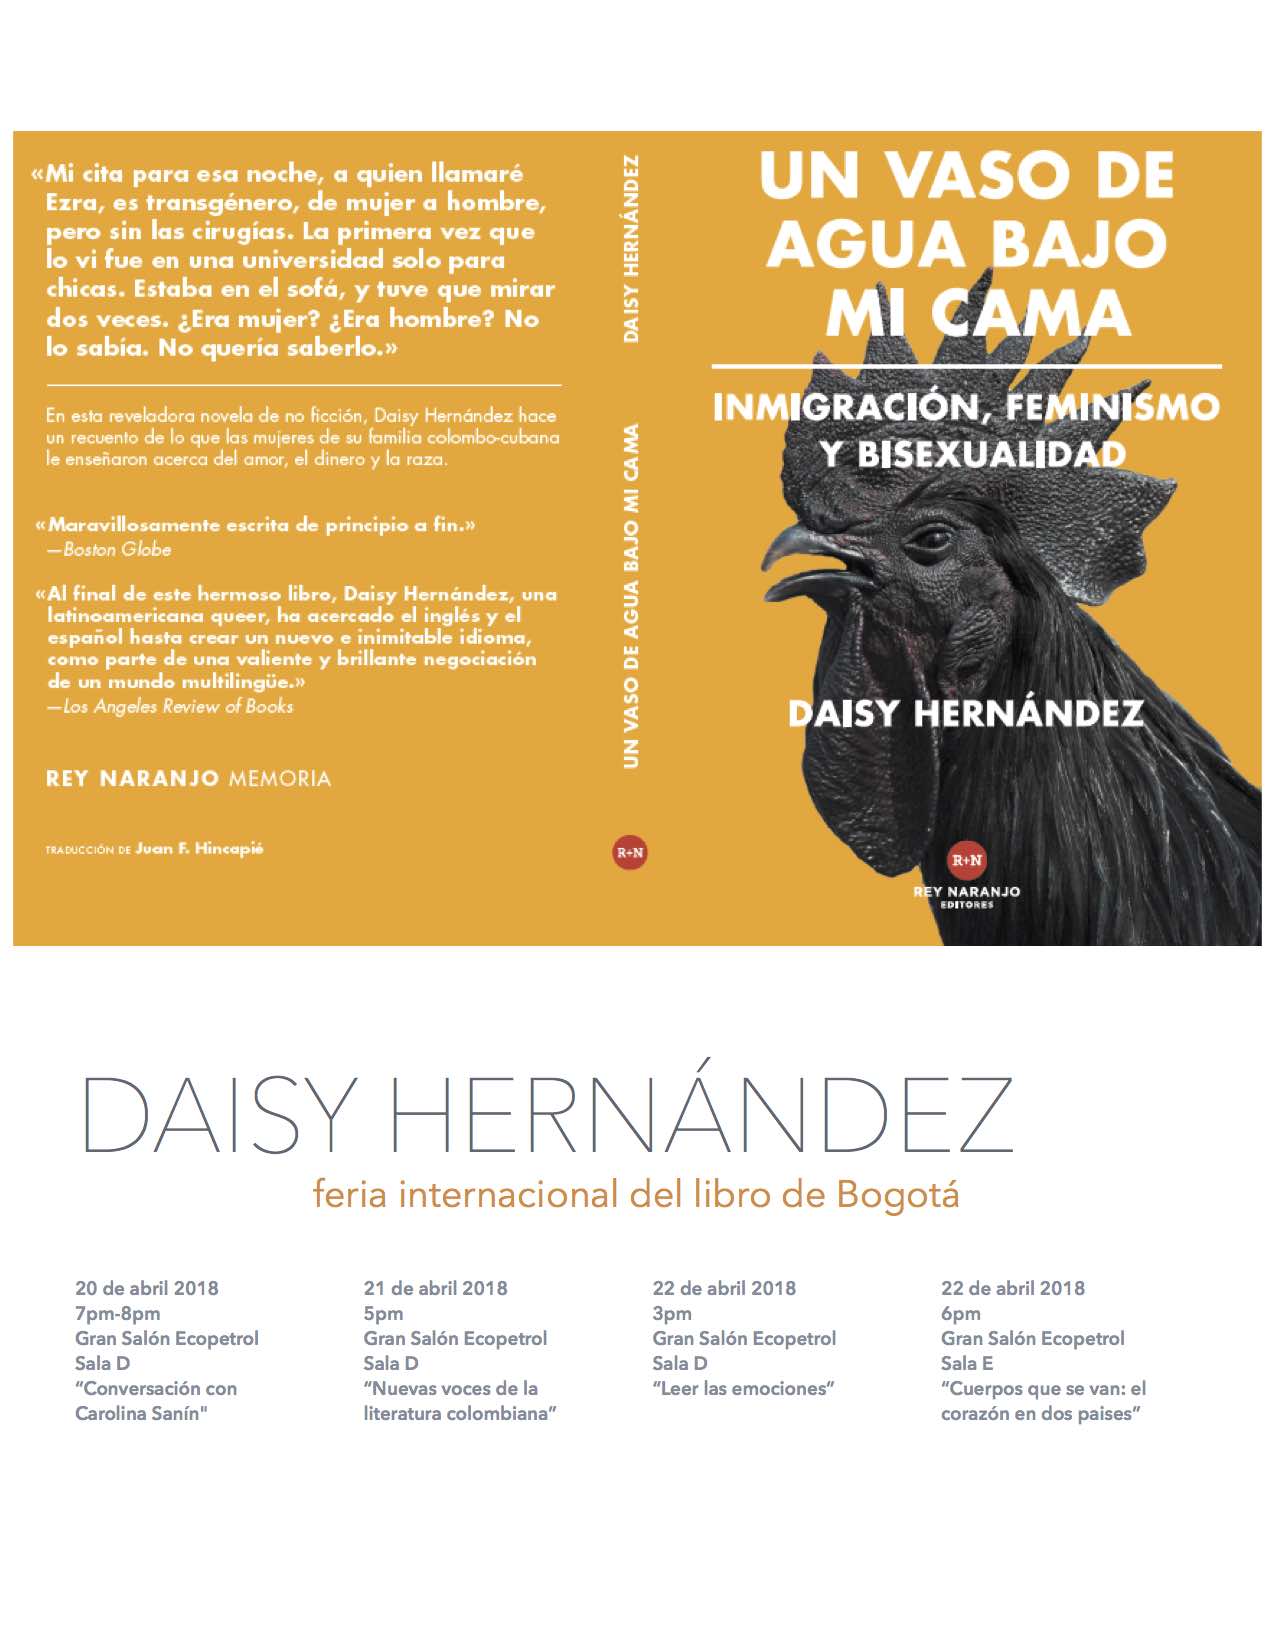 Author Q A With Daisy Hernandez I Was Confused Why The American Dream Didn T Get To Include Everyone